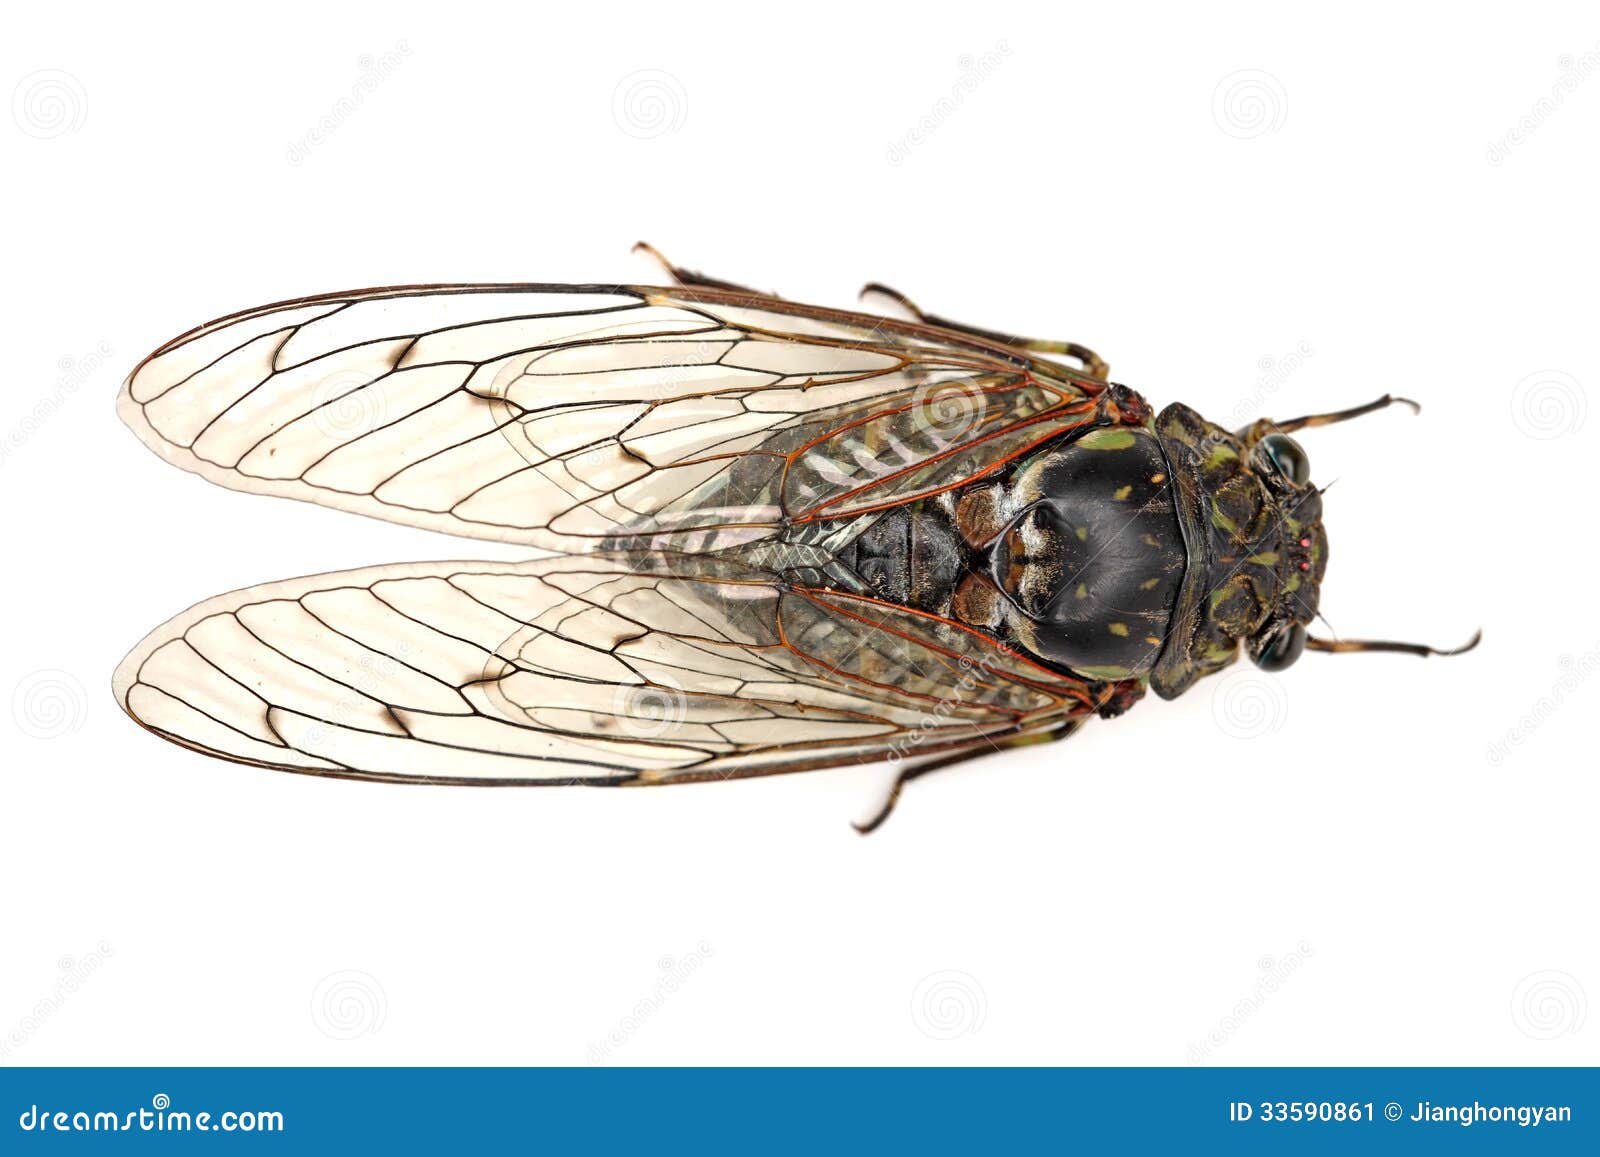 cicada insect